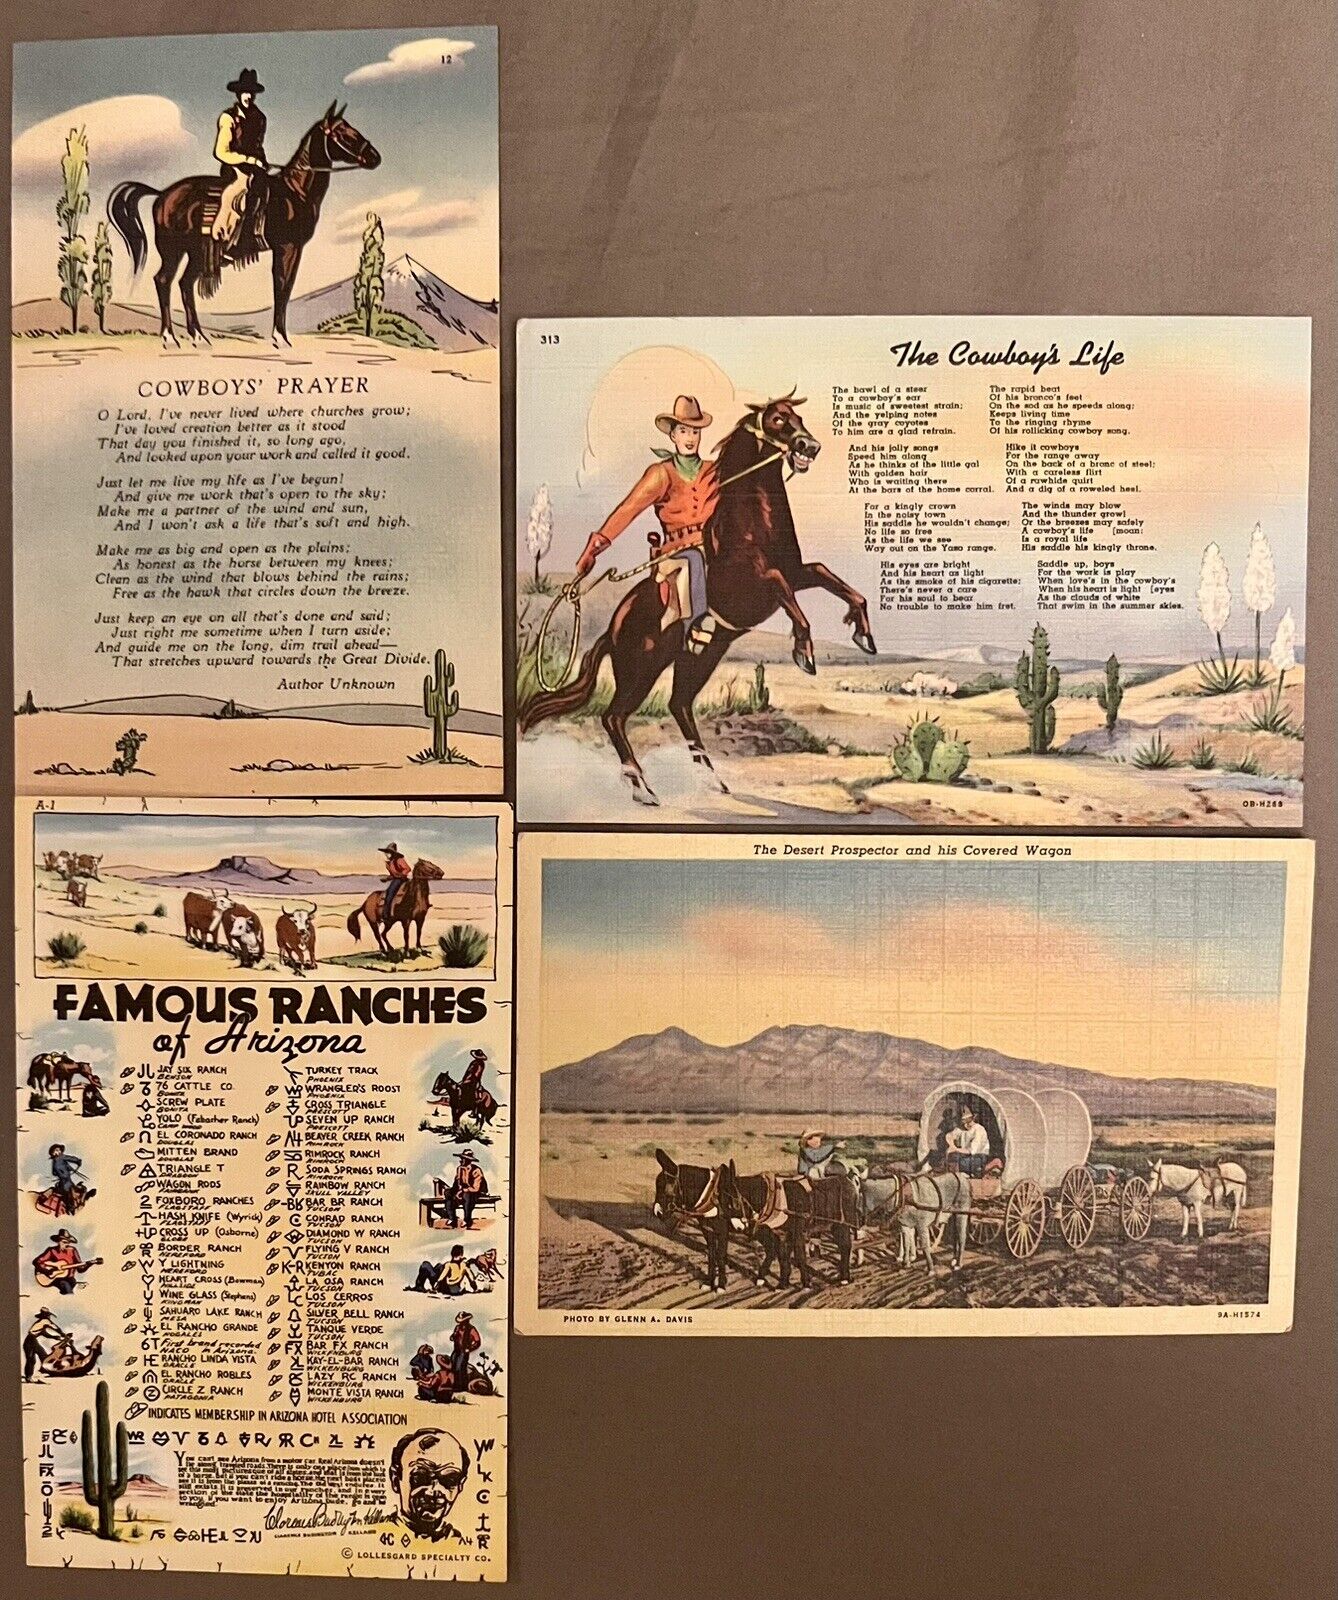 4 Antique Postcards from 1900's Cowboy Life,Prayer & Prospector,Famous Ranches